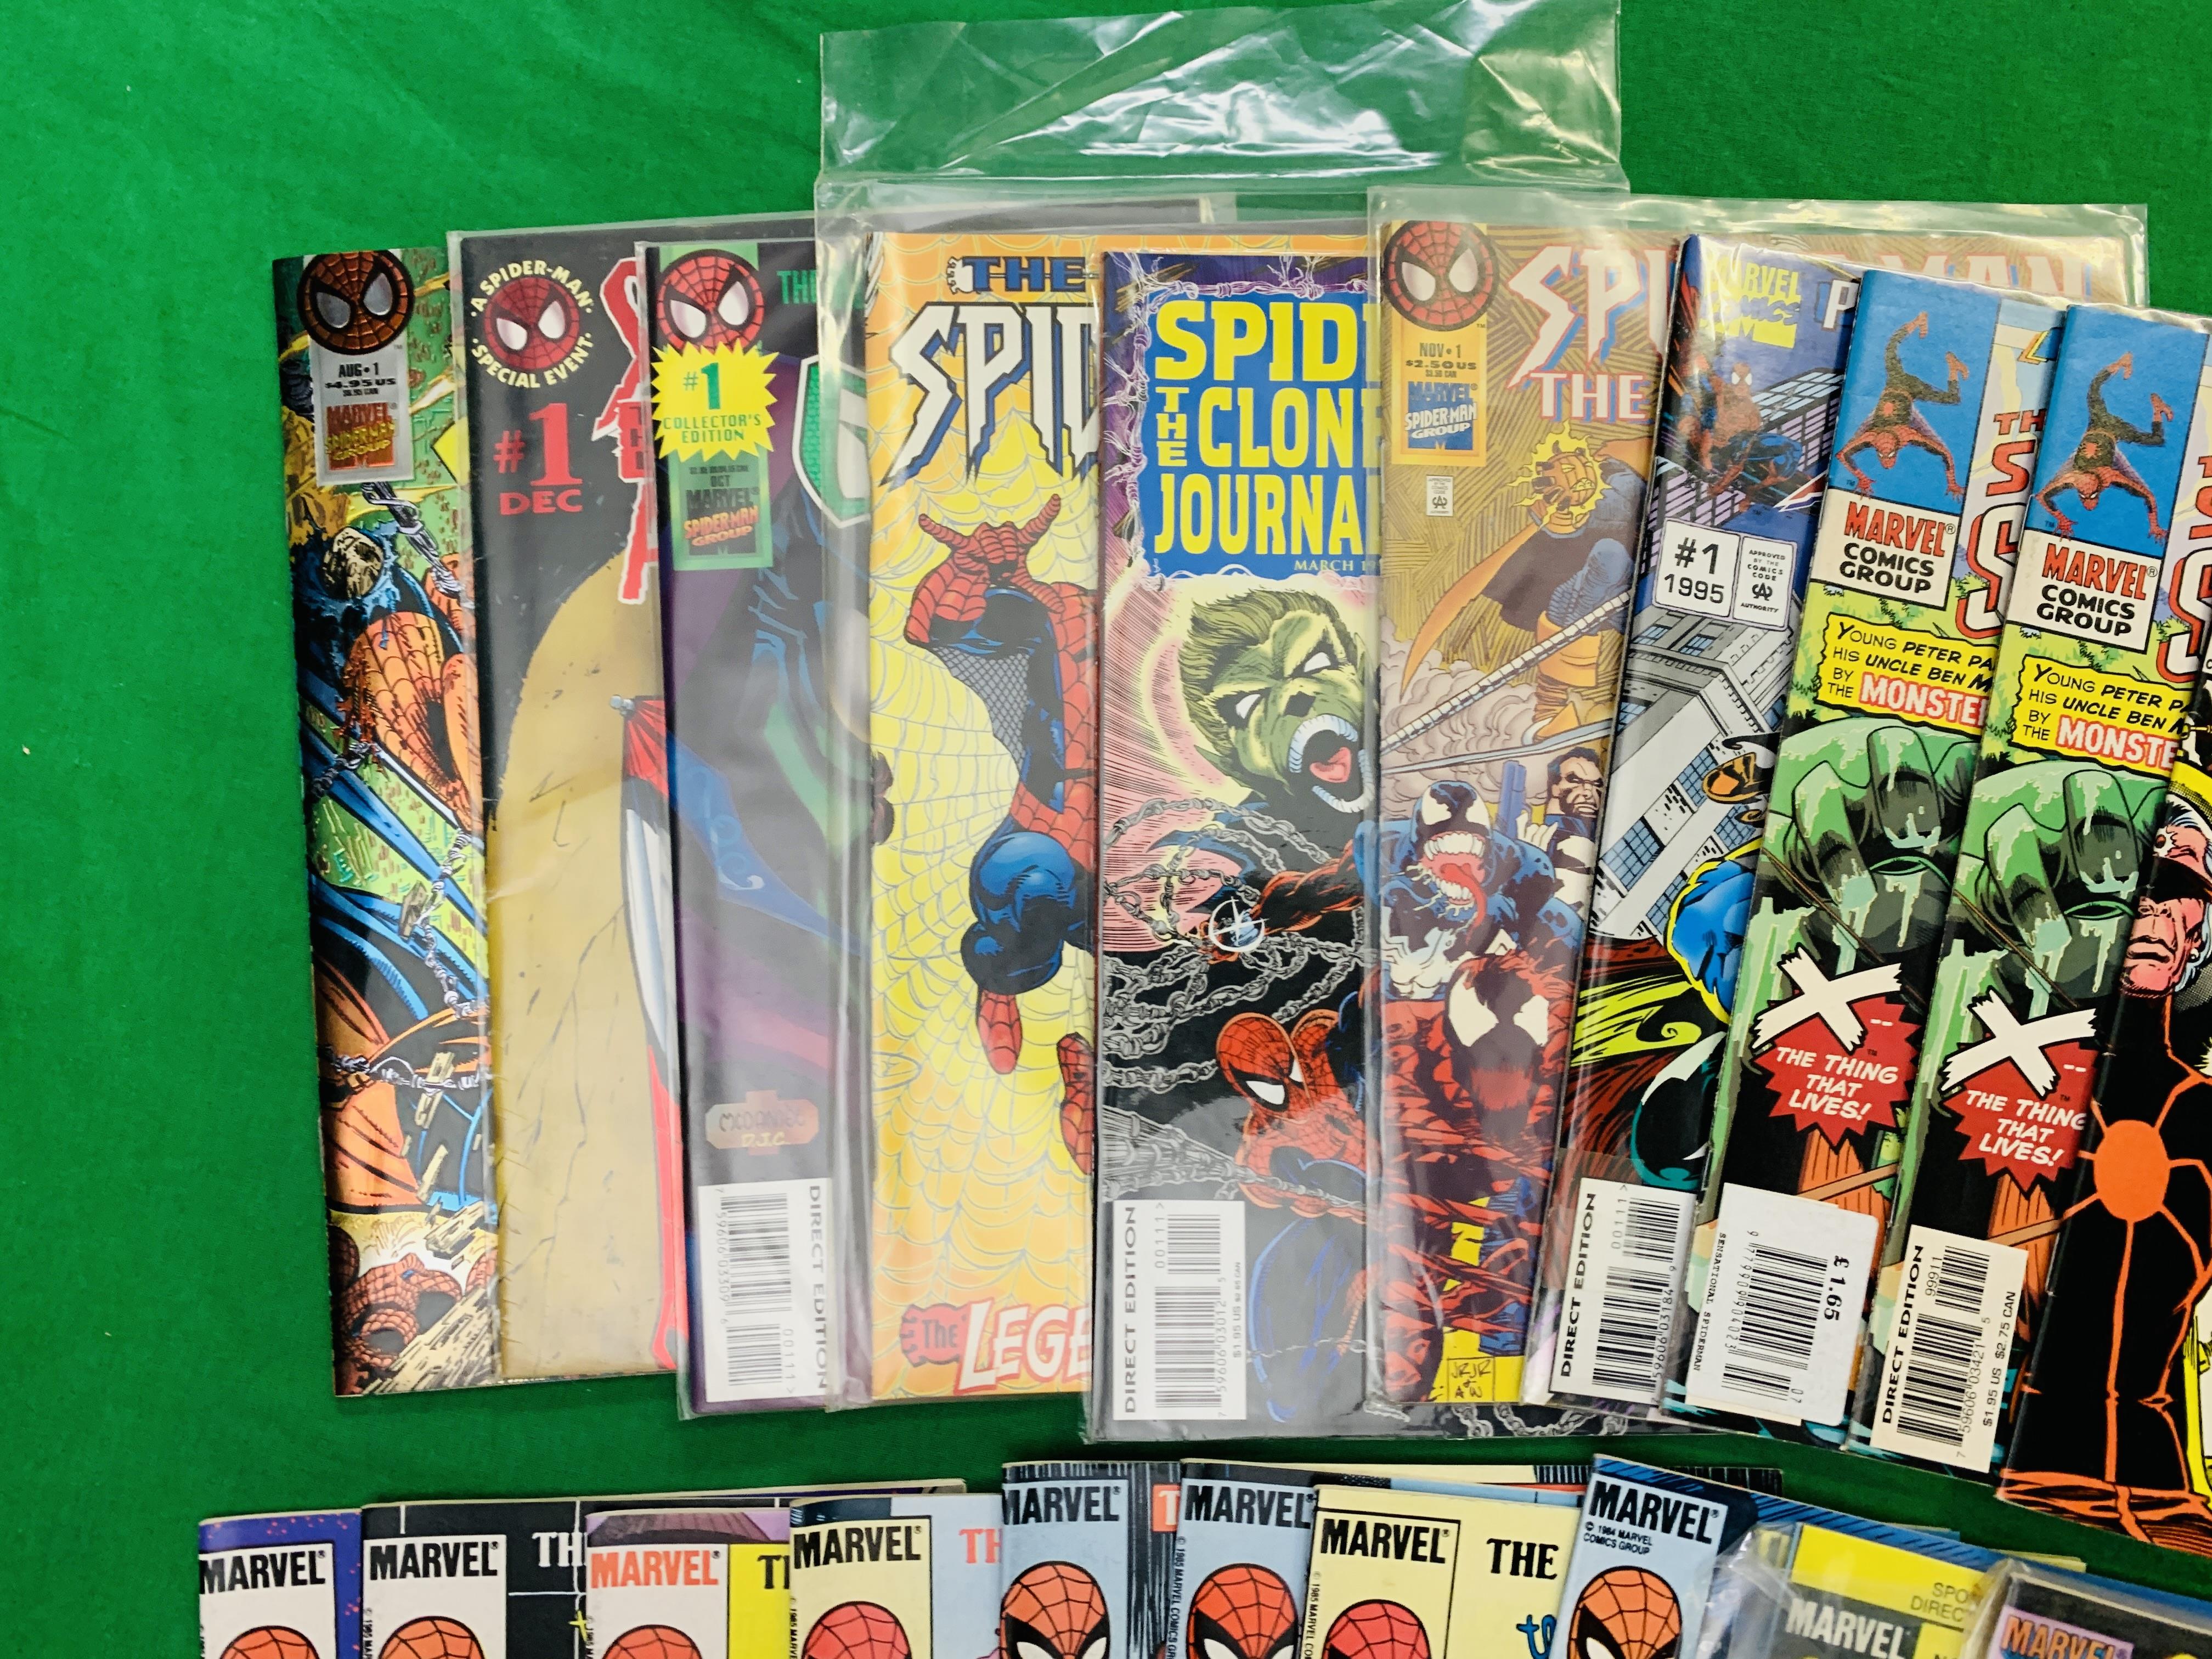 MARVEL COMICS A COLLECTION OF SPIDERMAN COMICS TO INCLUDE THE OFFICIAL MARVEL INDEX NO. - Image 5 of 5